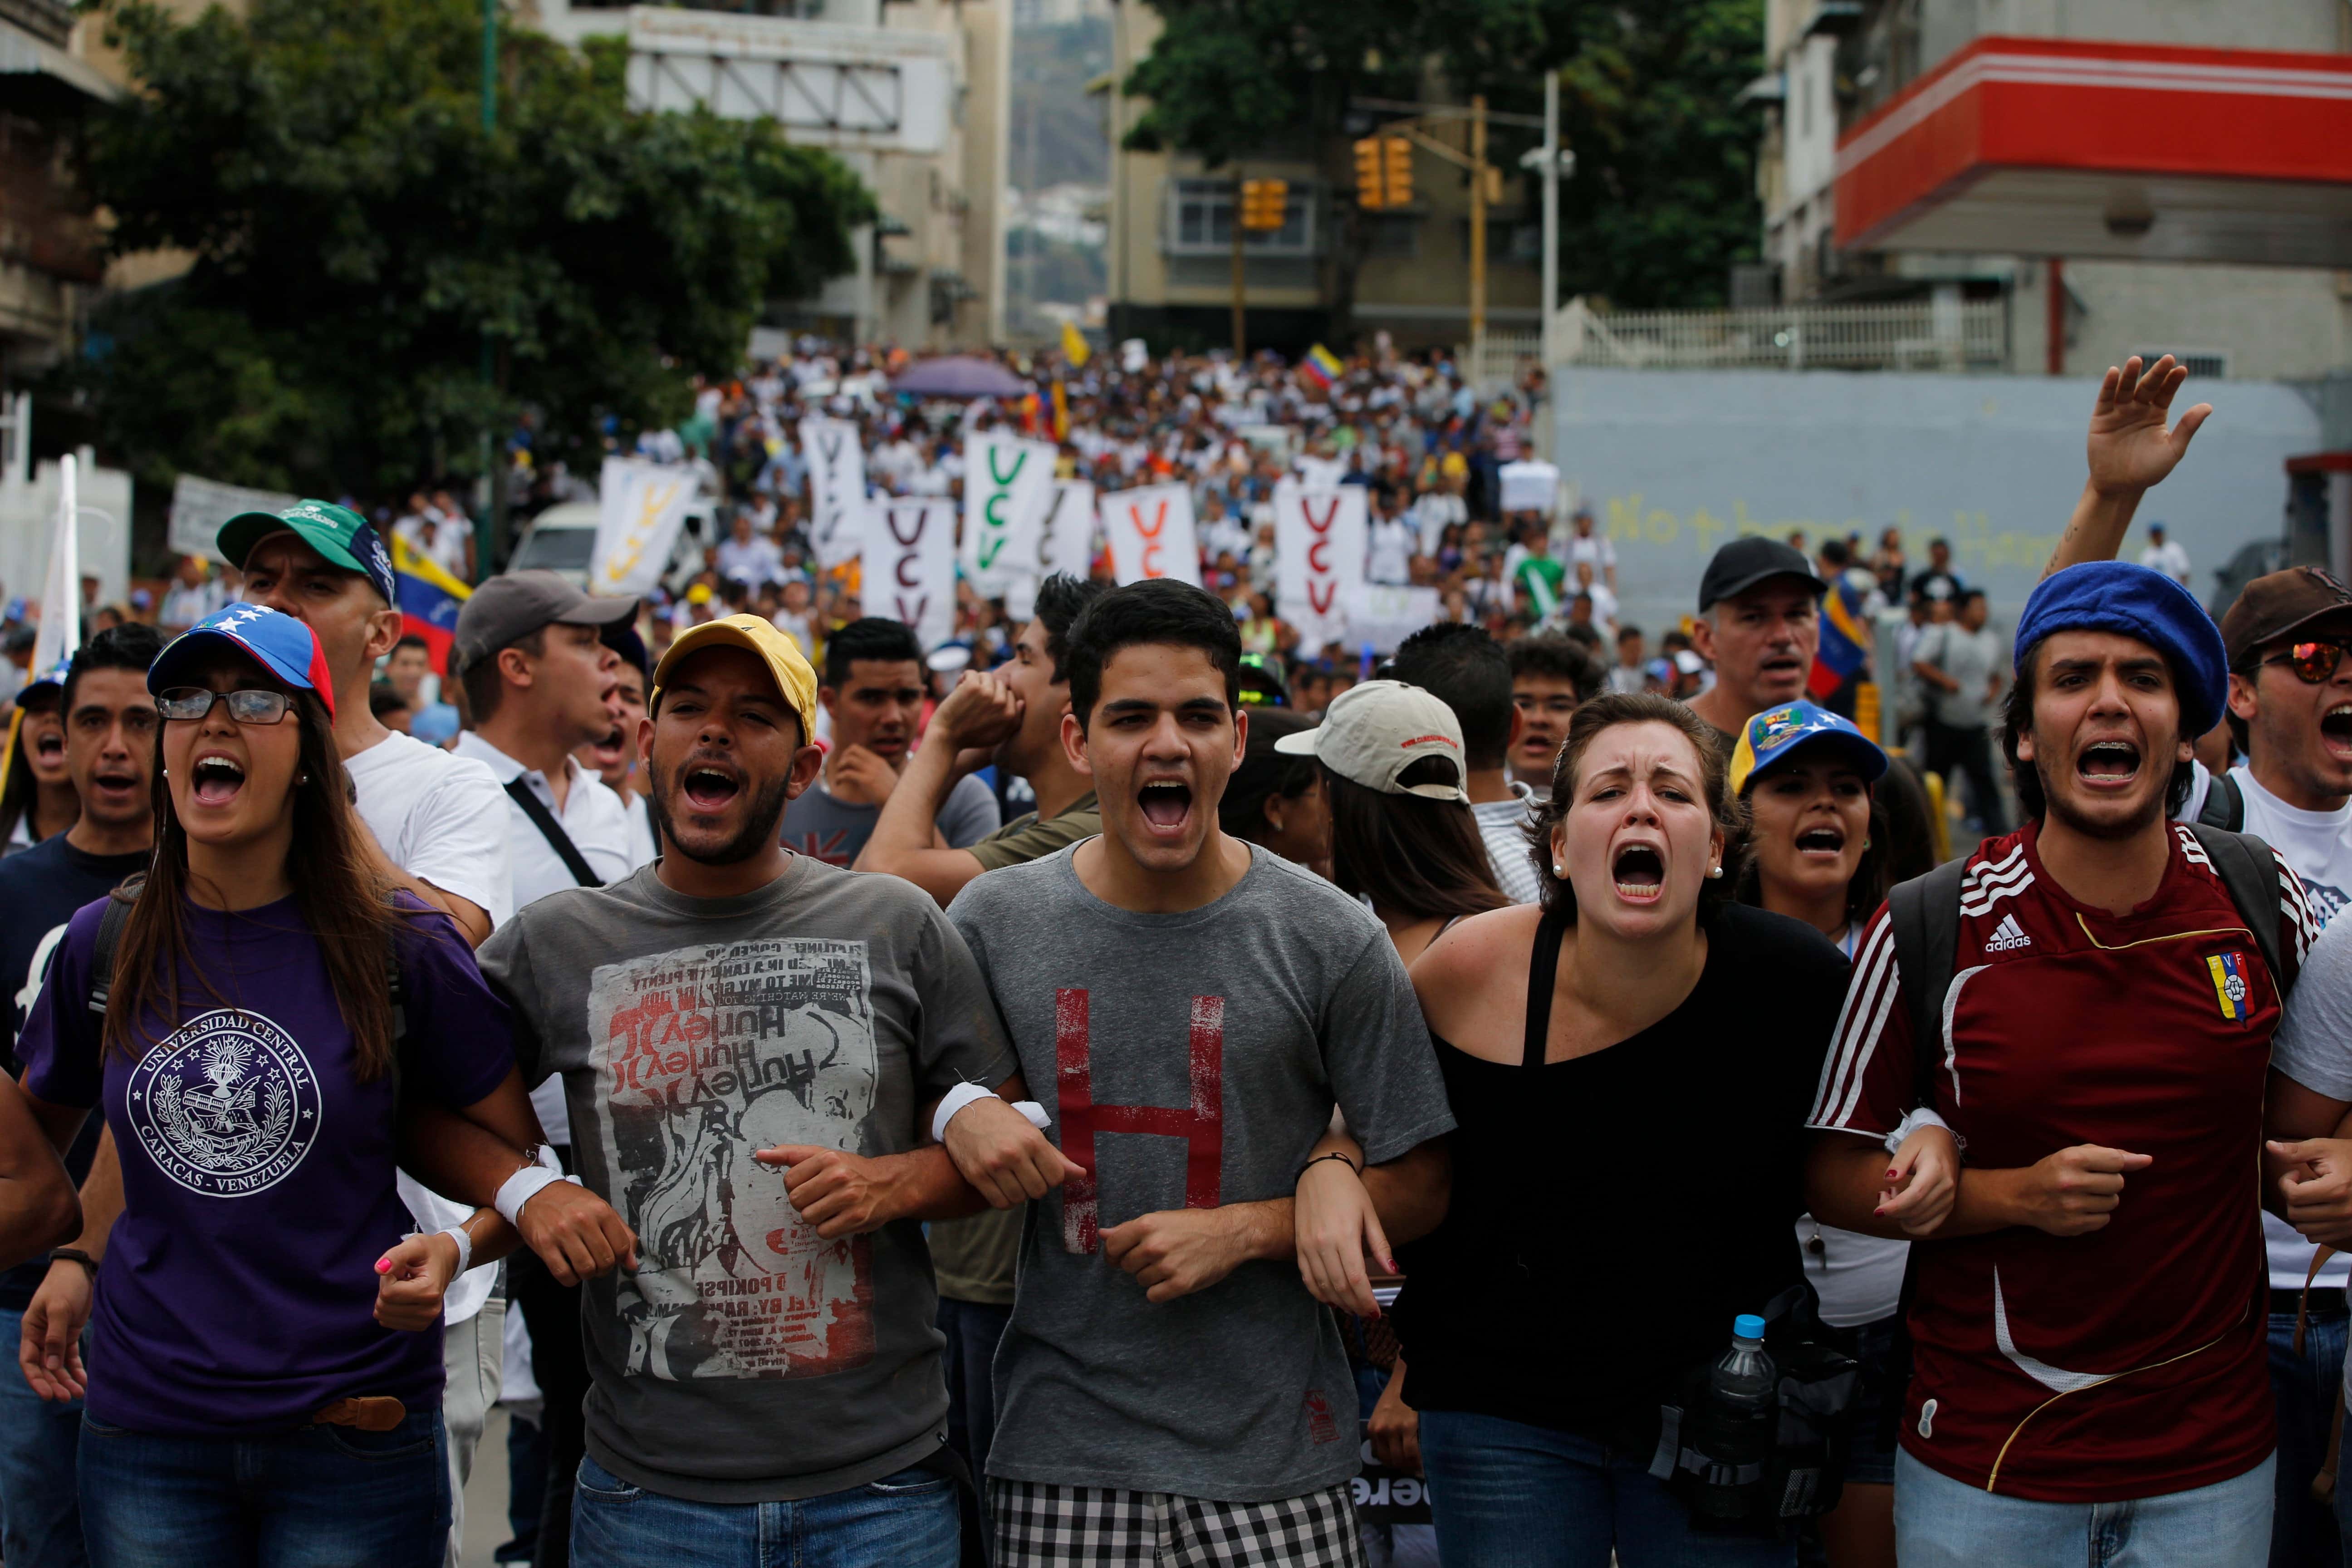 Students at Central University (UCV) in Caracas shout slogans during protest on 12 March 2014, AP Photo/Fernando Llano